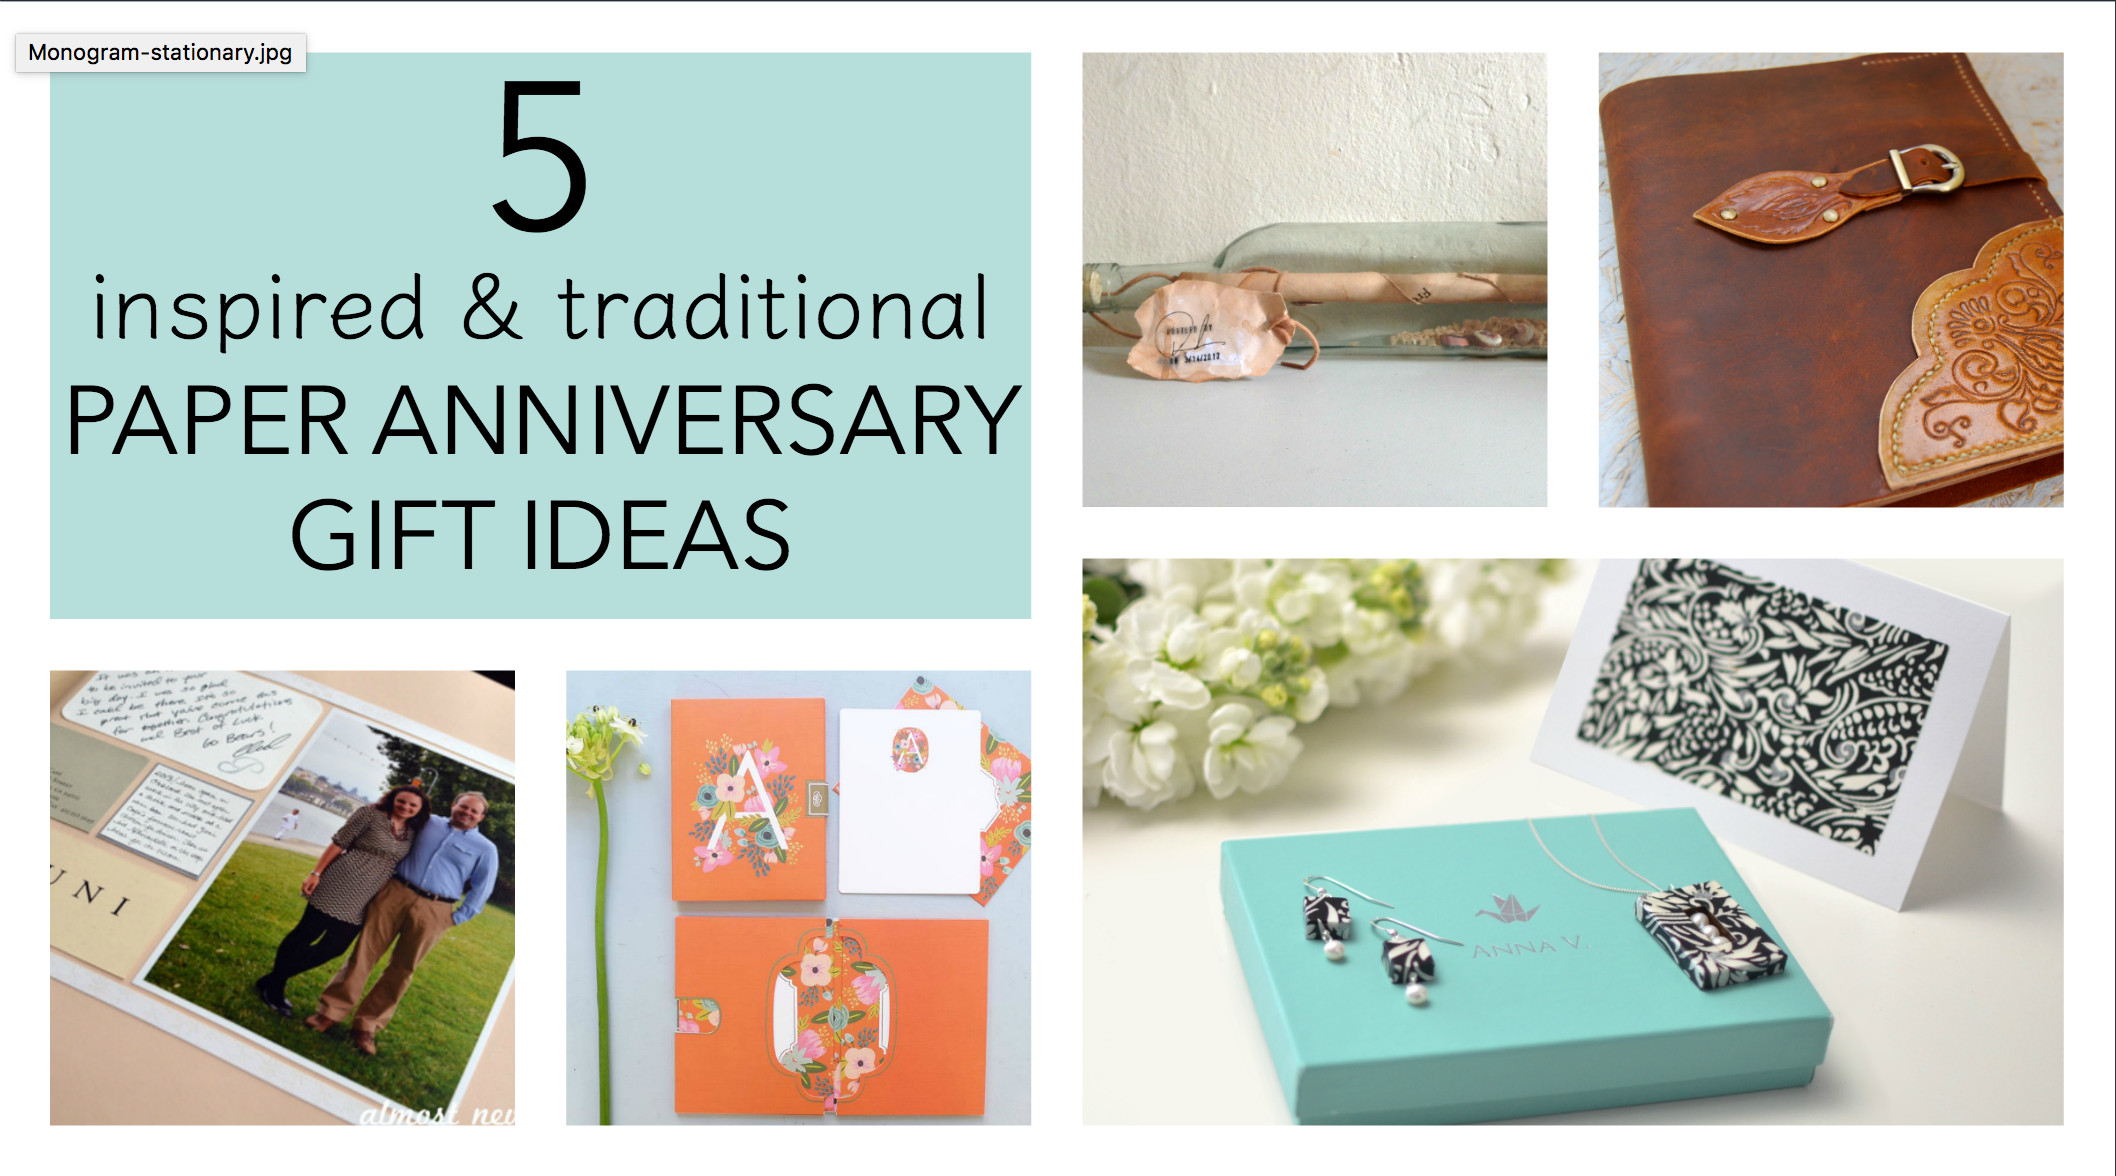 First Anniversary Paper Gift Ideas
 5 Traditional Paper Anniversary Gift Ideas for Her Paper